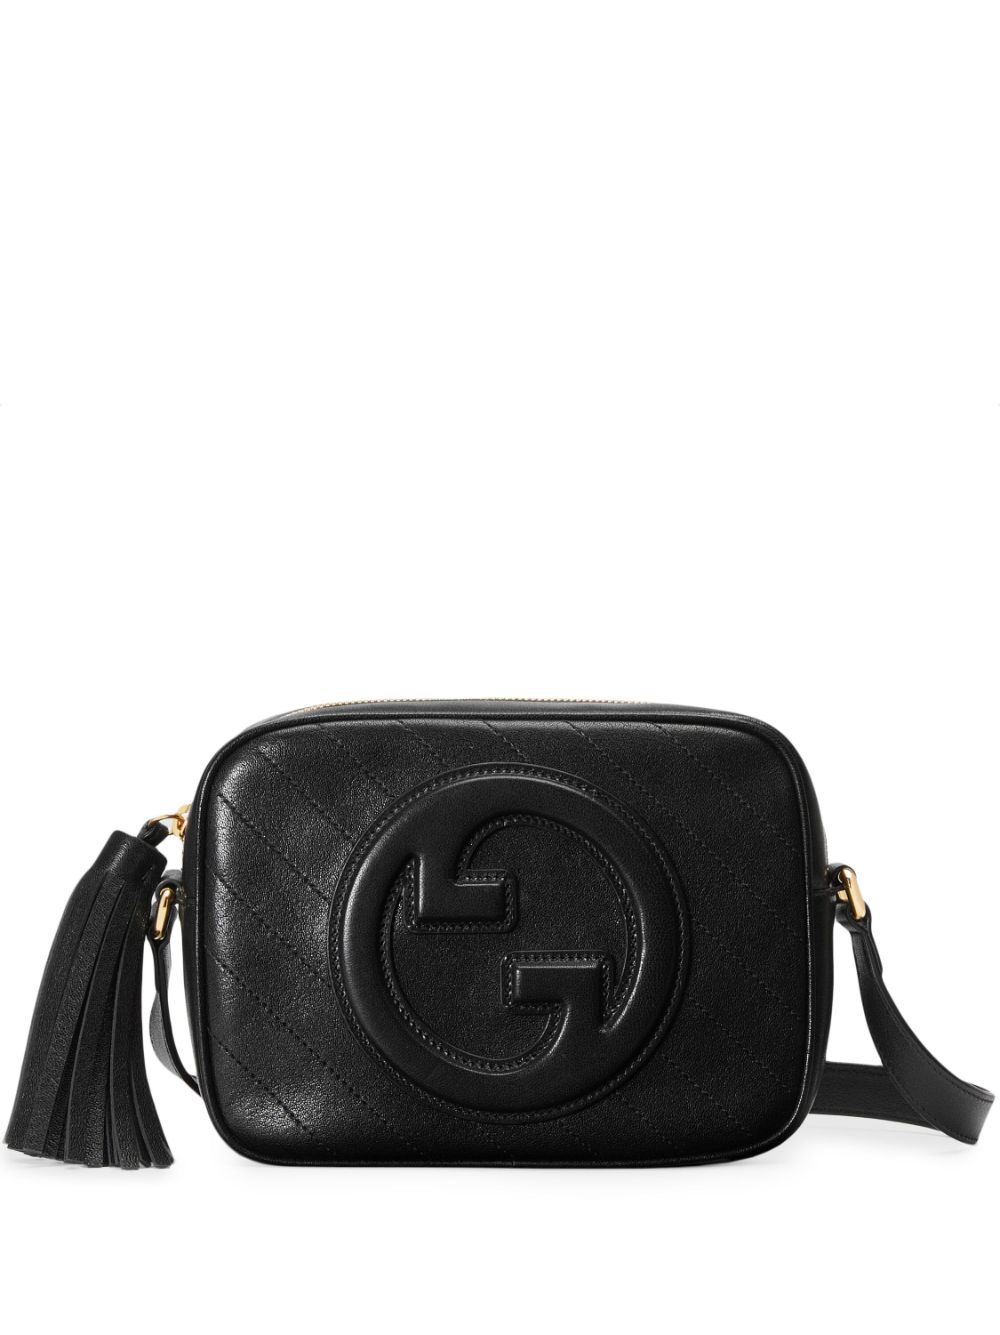 Gucci Blondie small shoulder bag in green leather